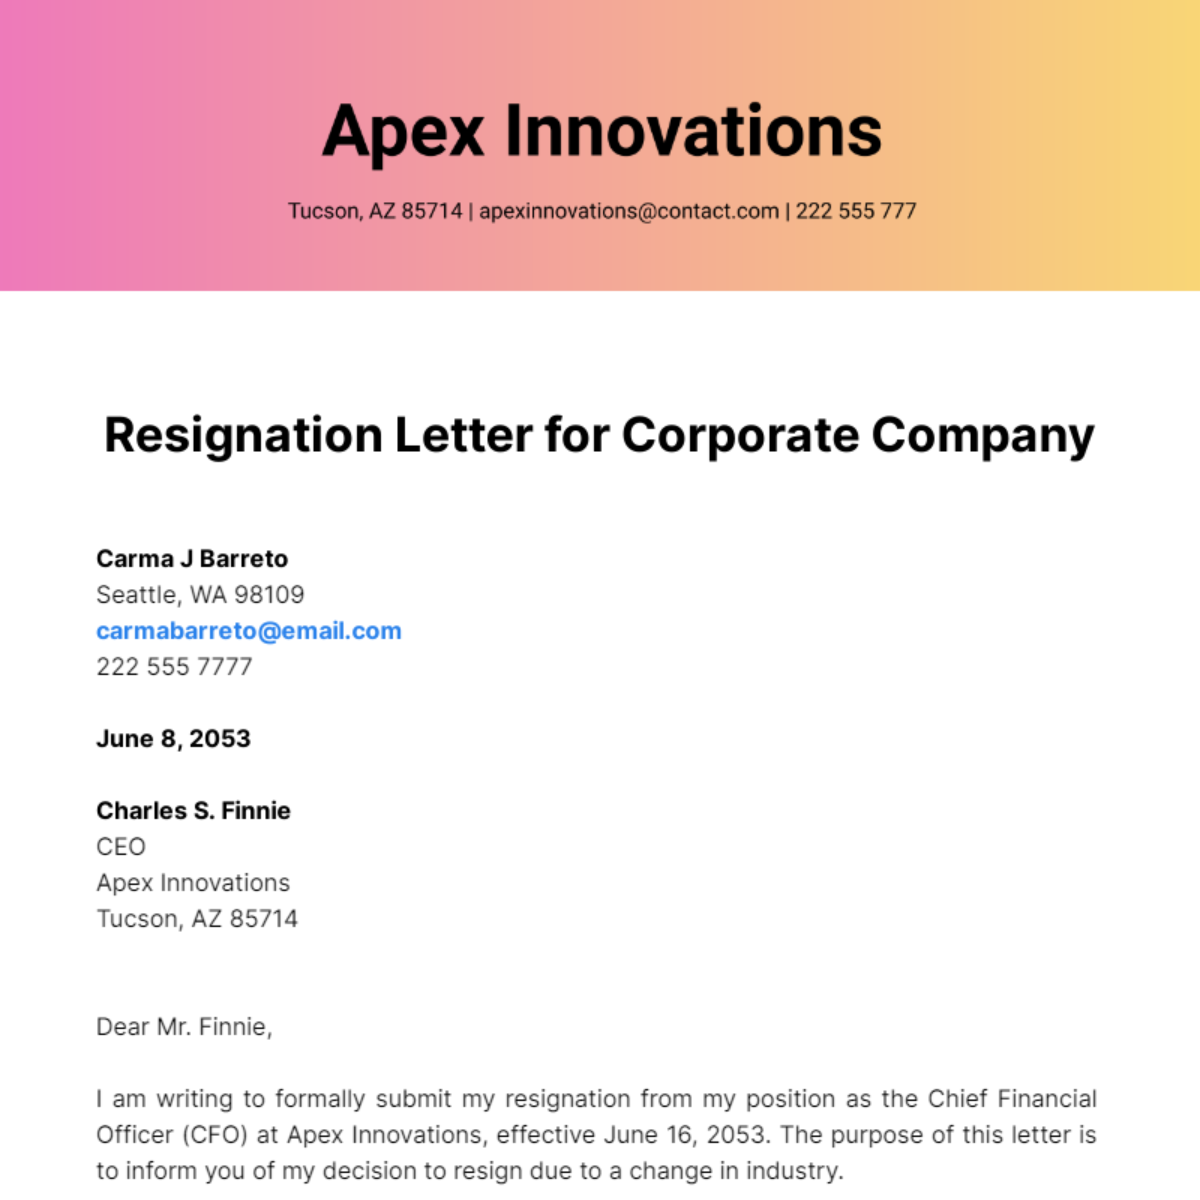 Resignation Letter for Corporate Company Template